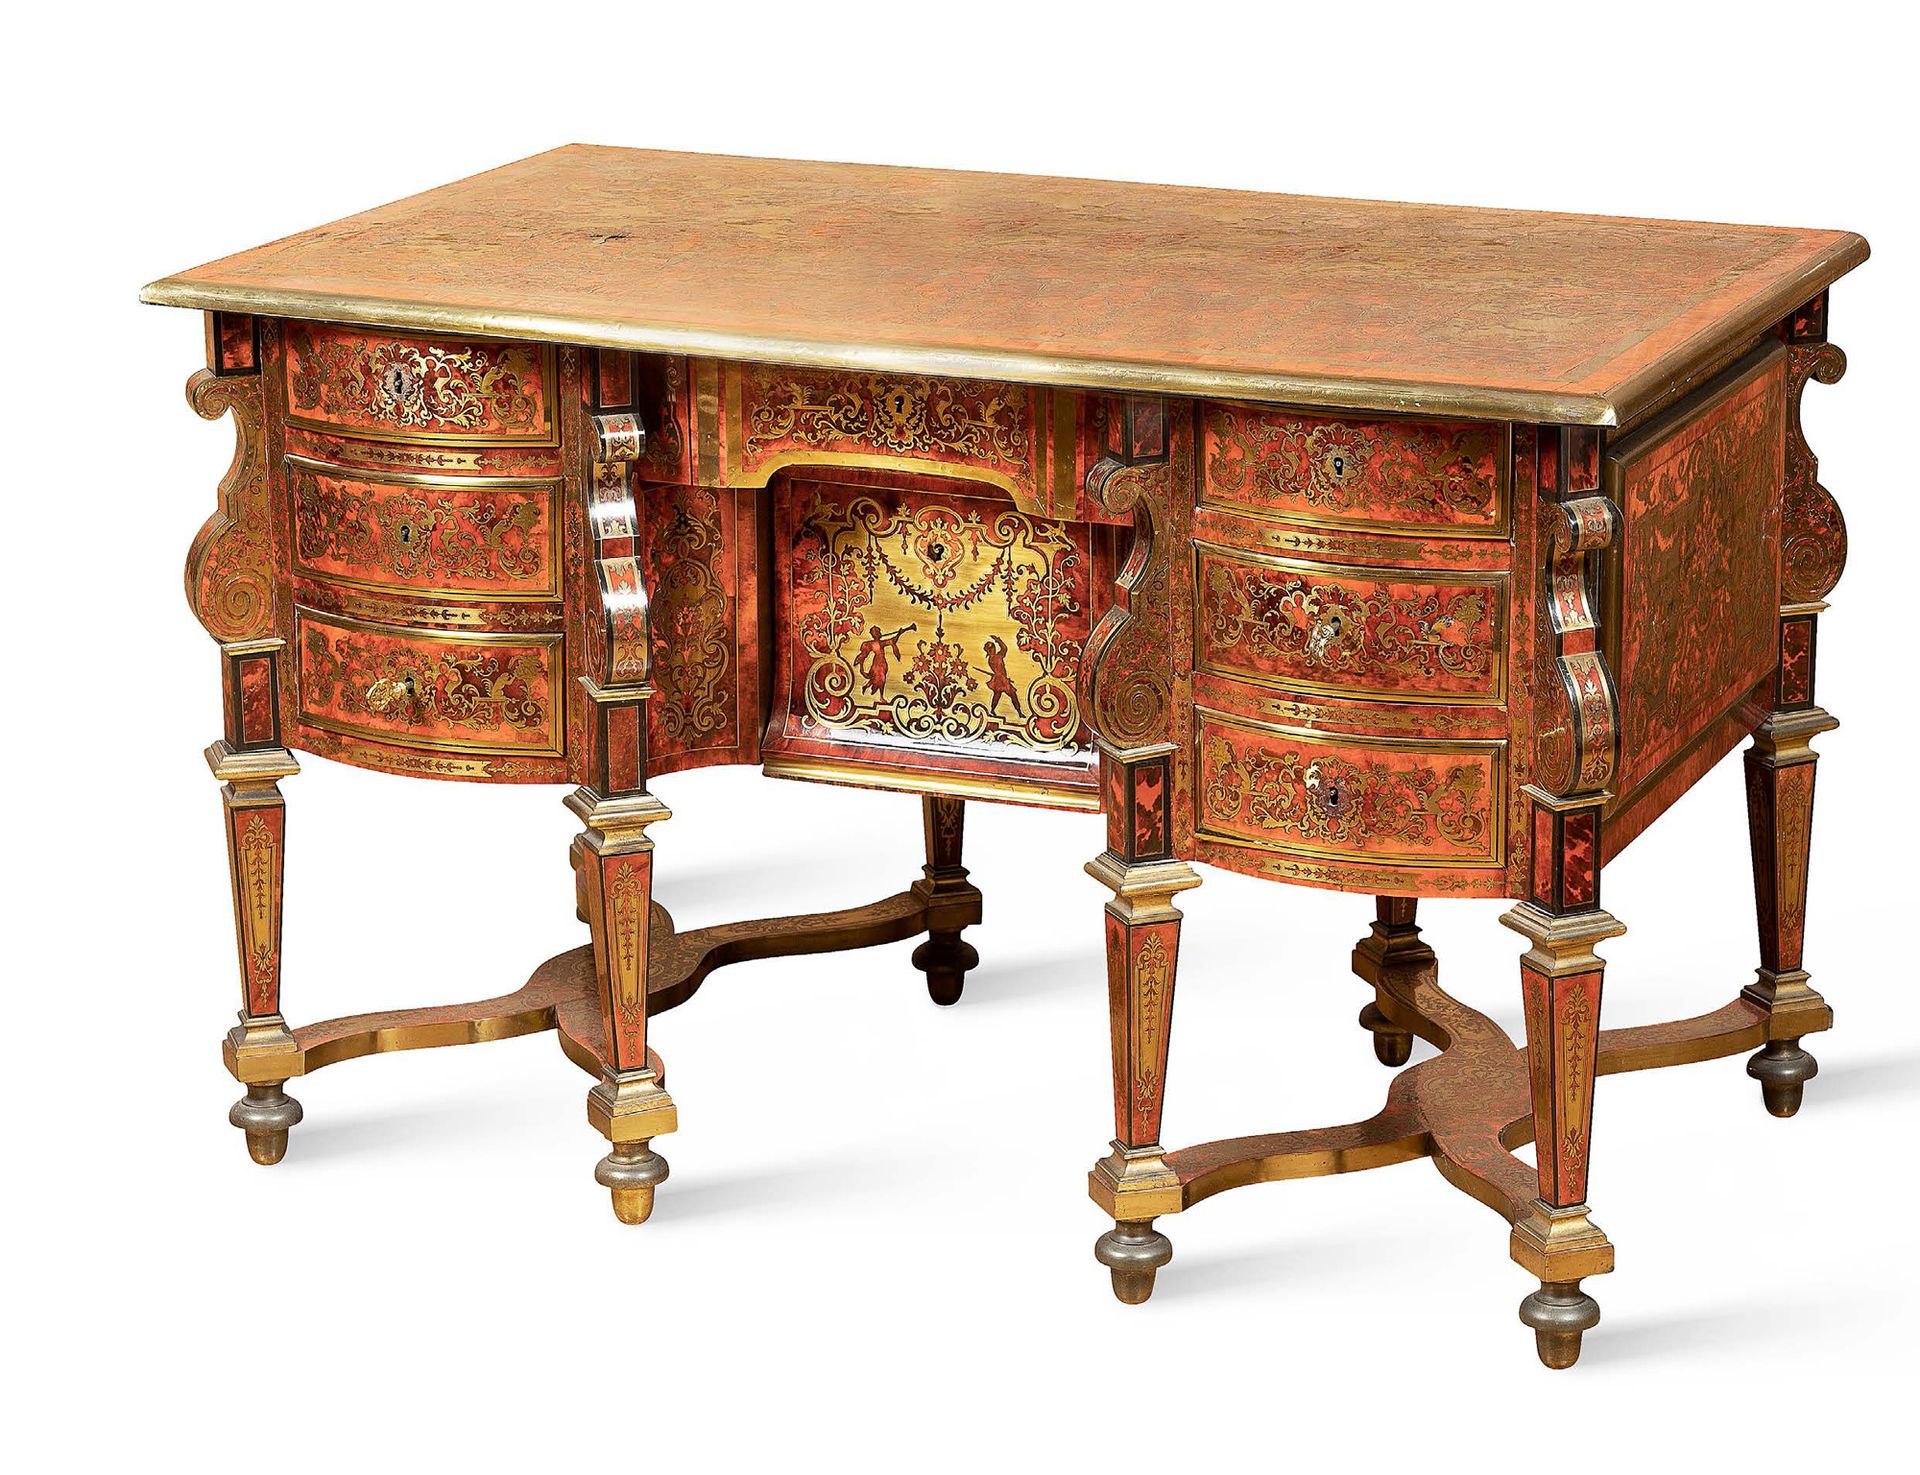 Desk with eight legs called "Mazarin" of scrolled form, with inlaid decoration i&hellip;